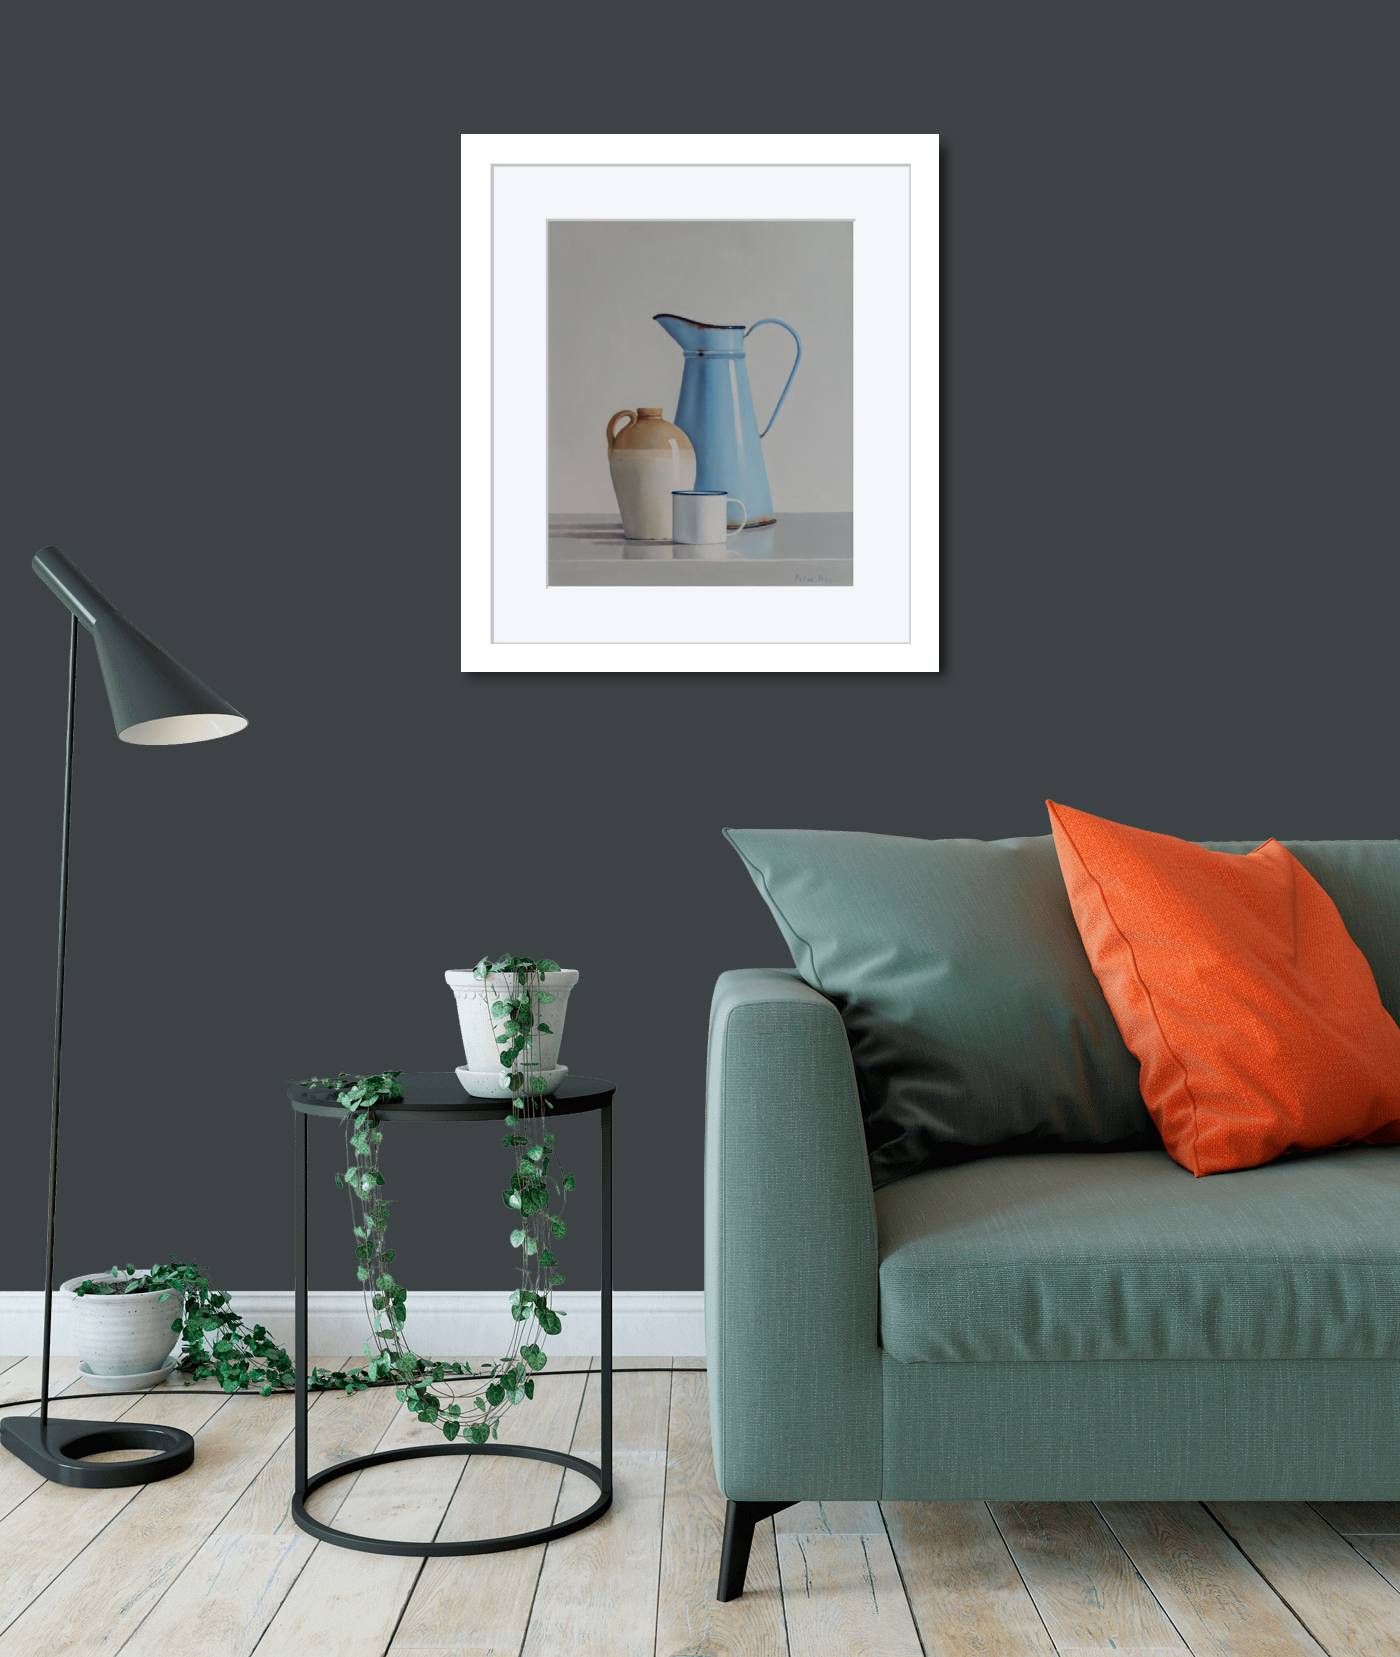 Large framed - Tall Blue Jug by Peter Dee